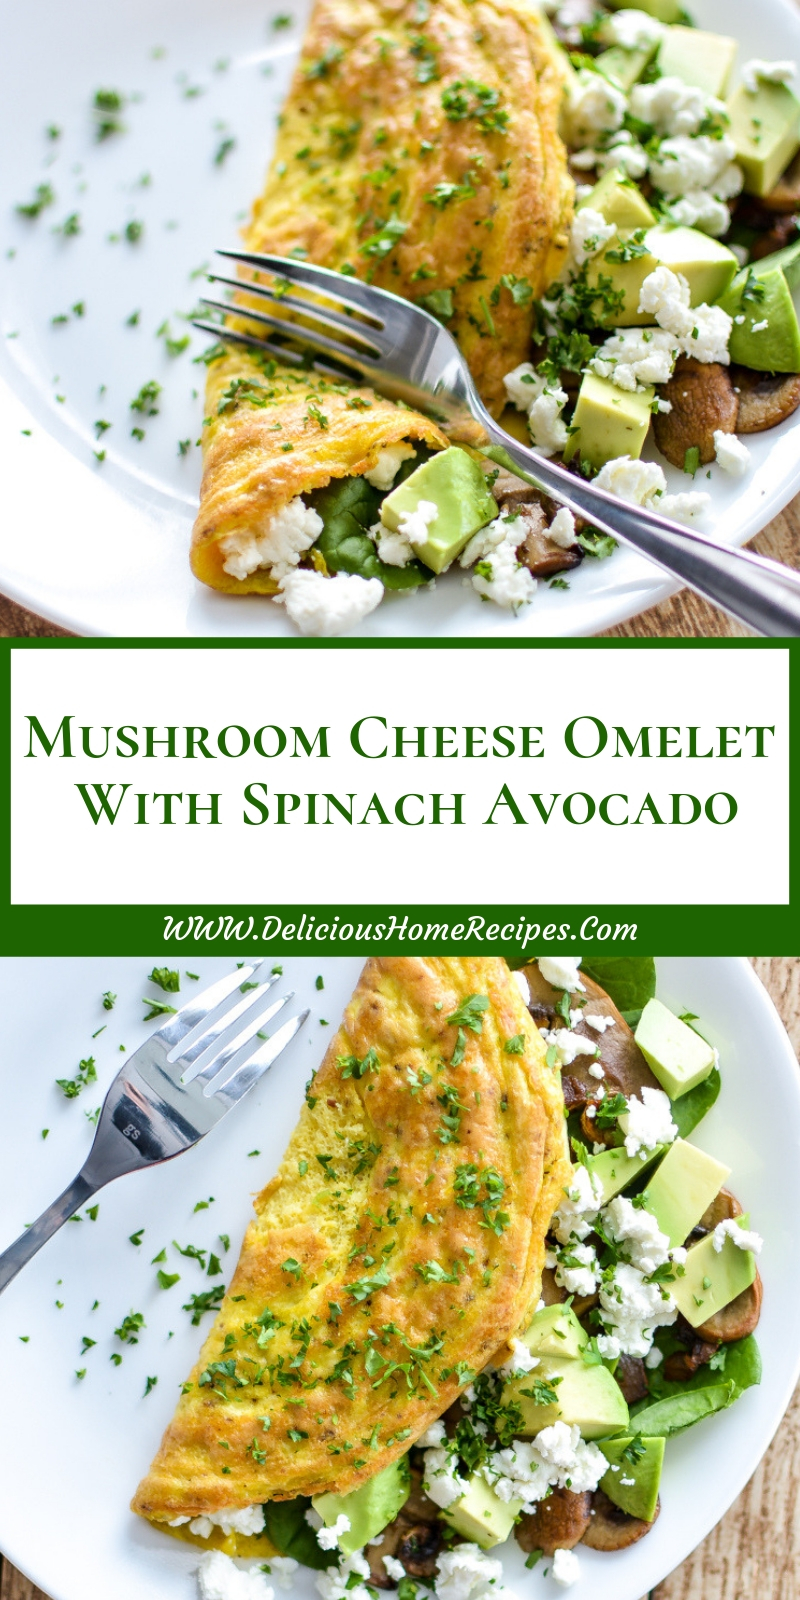 Mushroom Cheese Omelet With Spinach Avocado